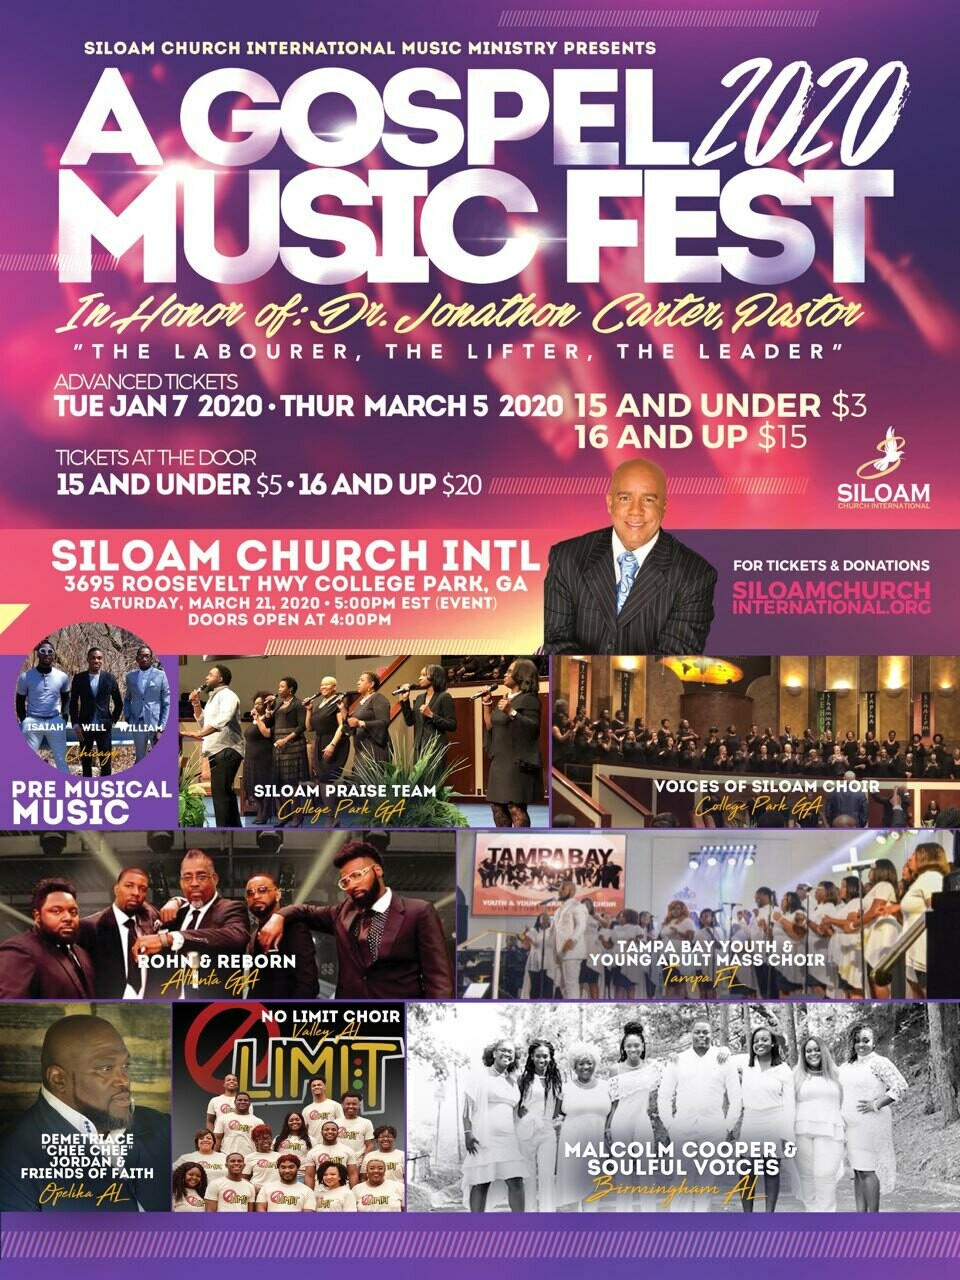 Gospel Music Fest 2020 - Ages 15 and under